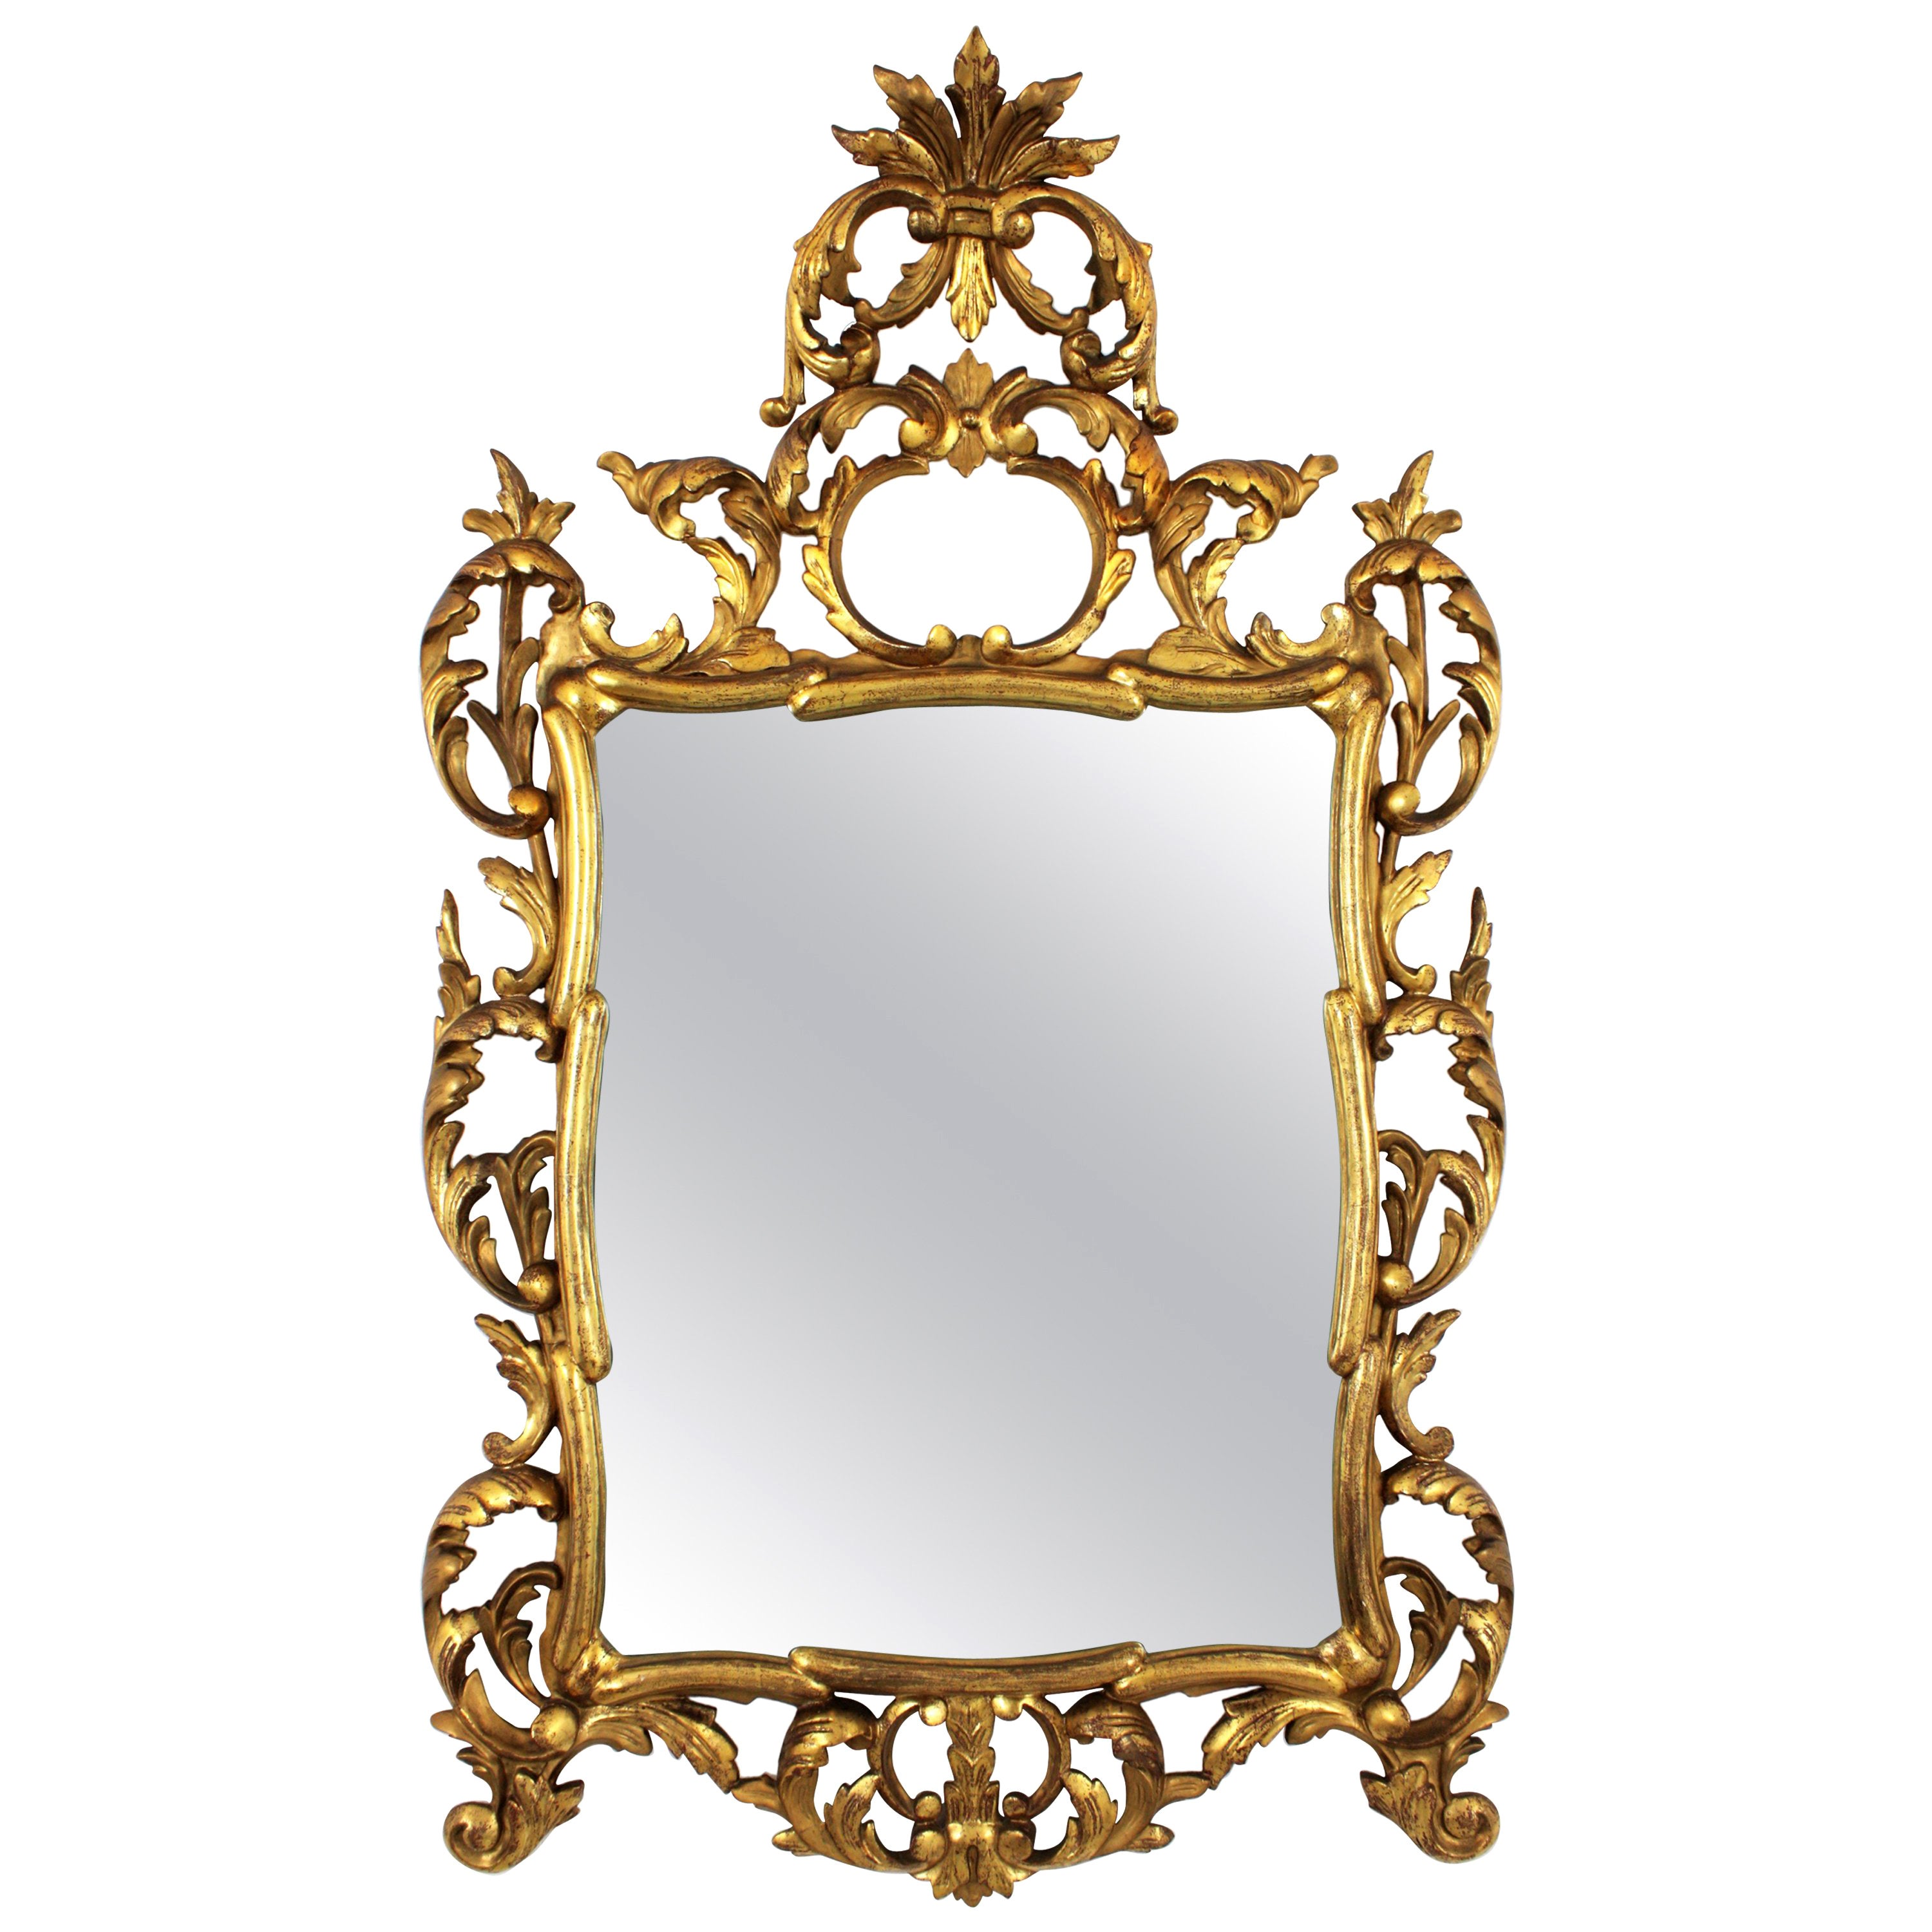 Spanish Rococo Giltwood Mirror with Crest